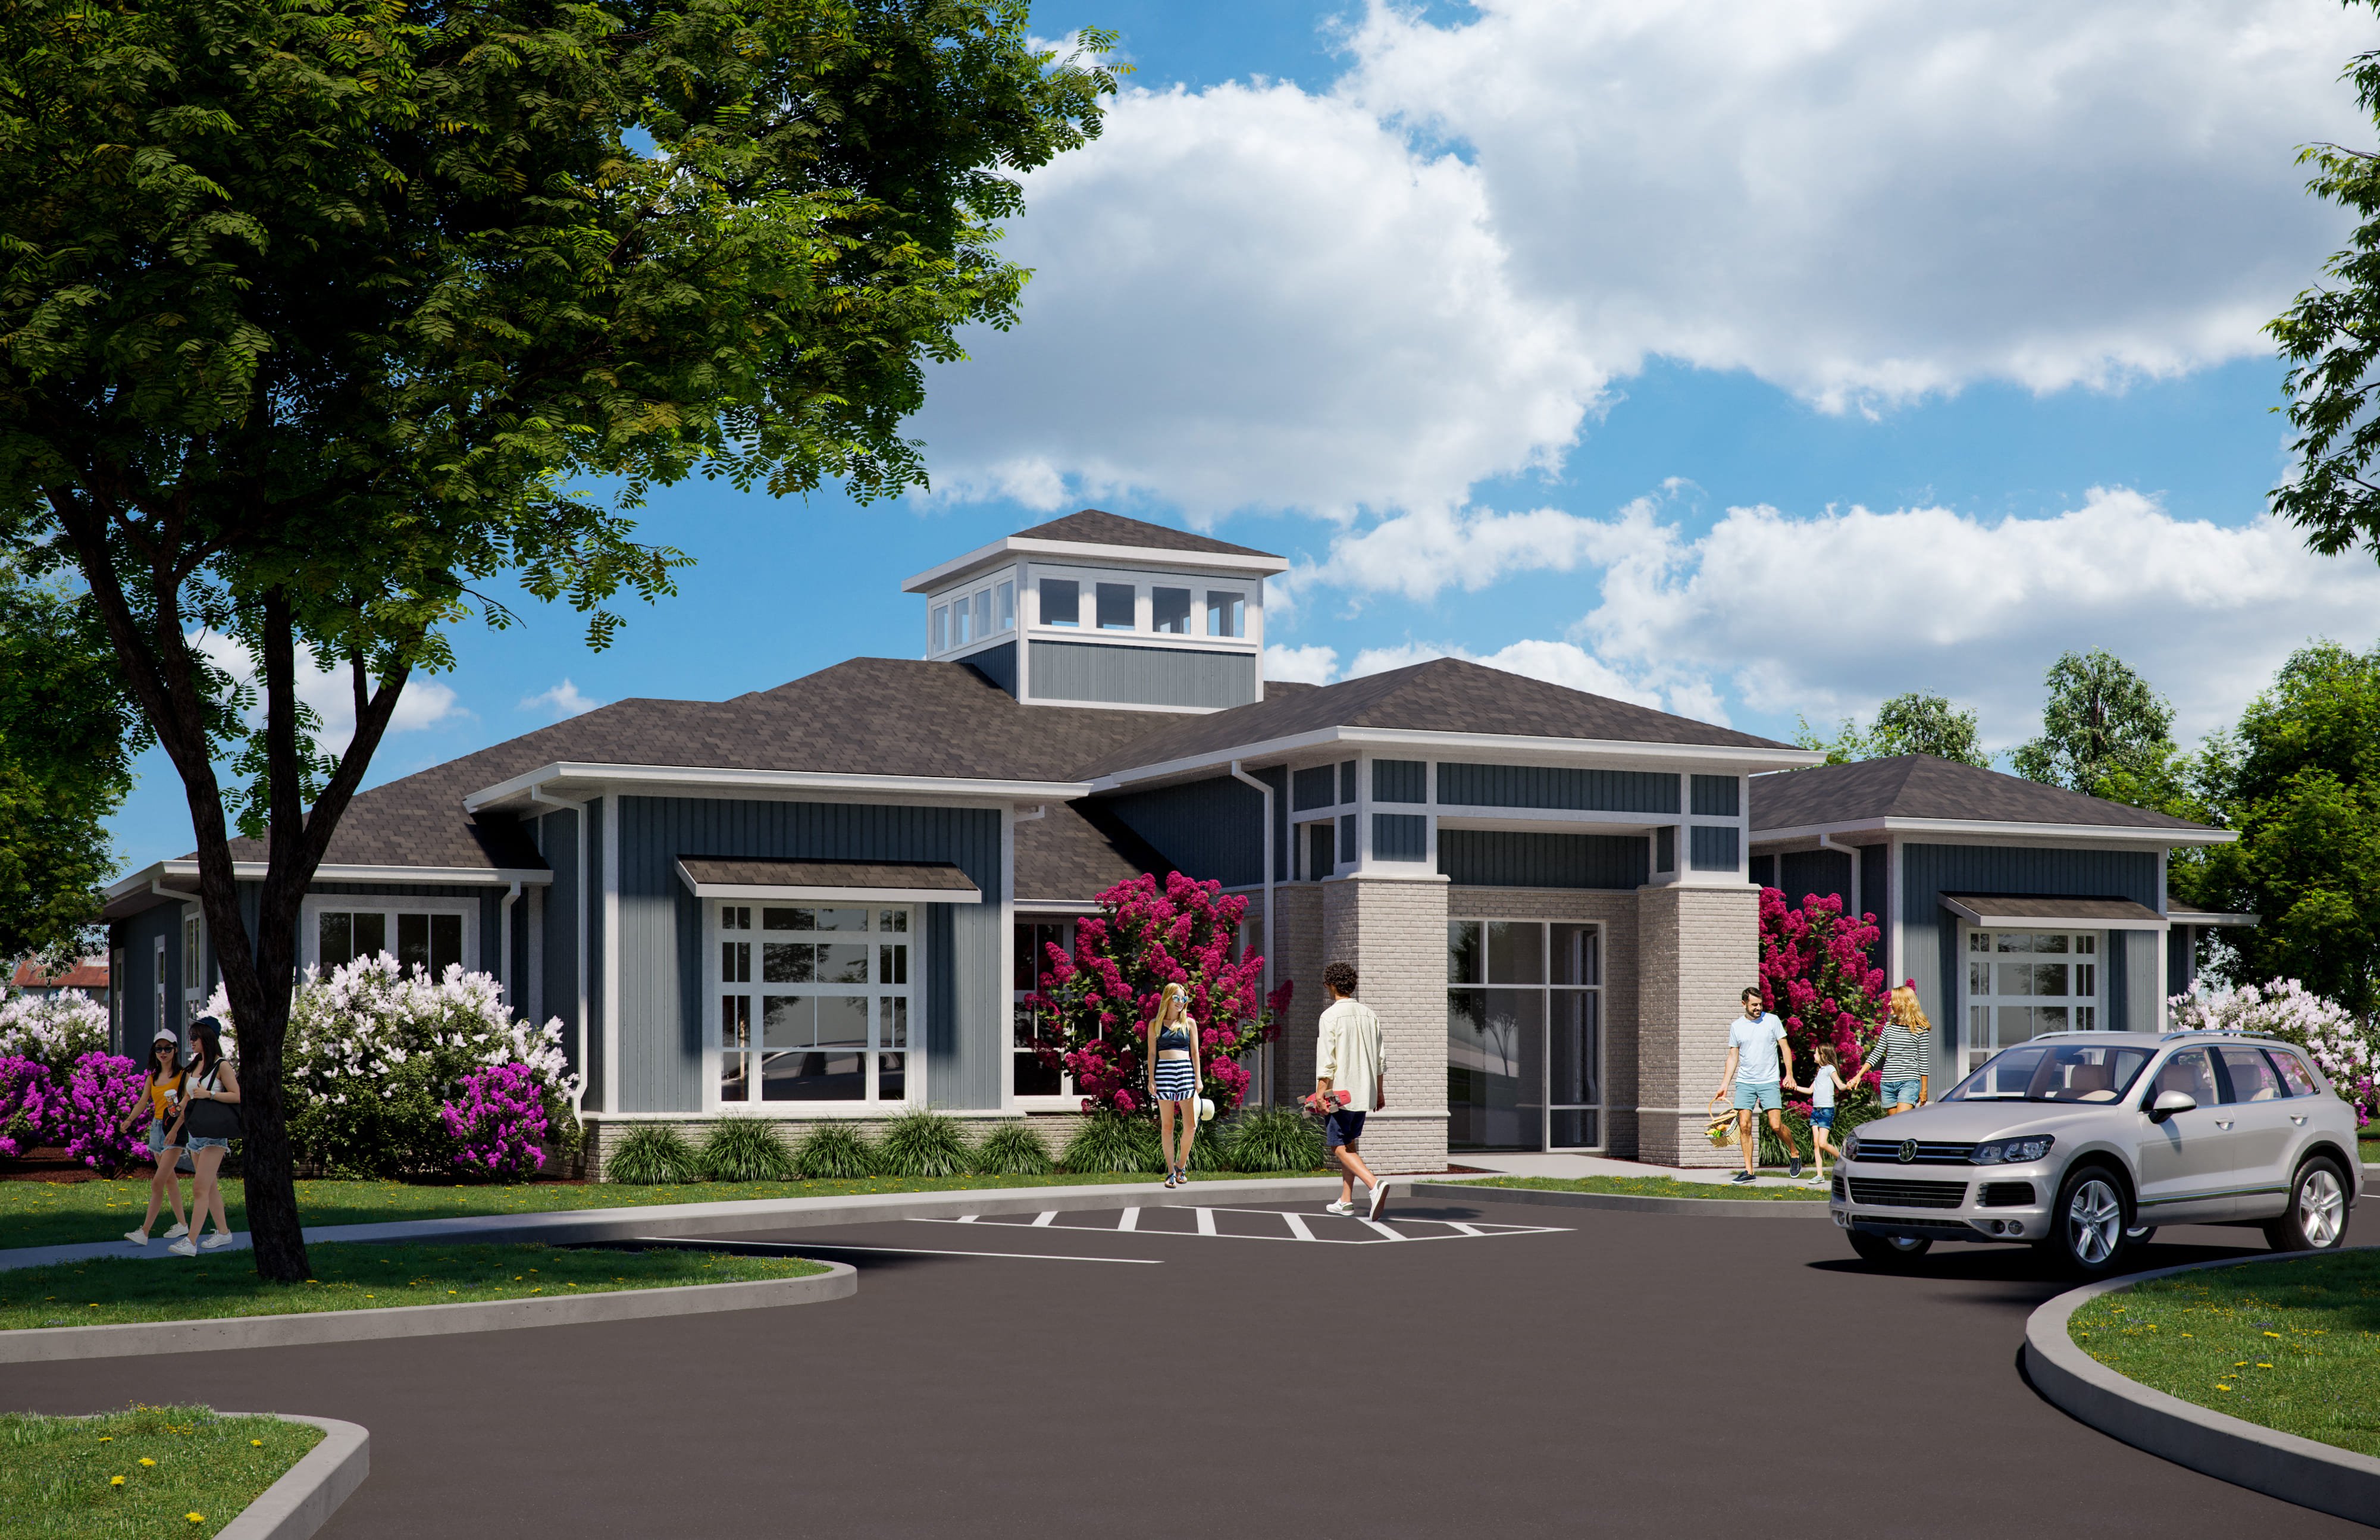 Rendering of clubhouse from the parking lot